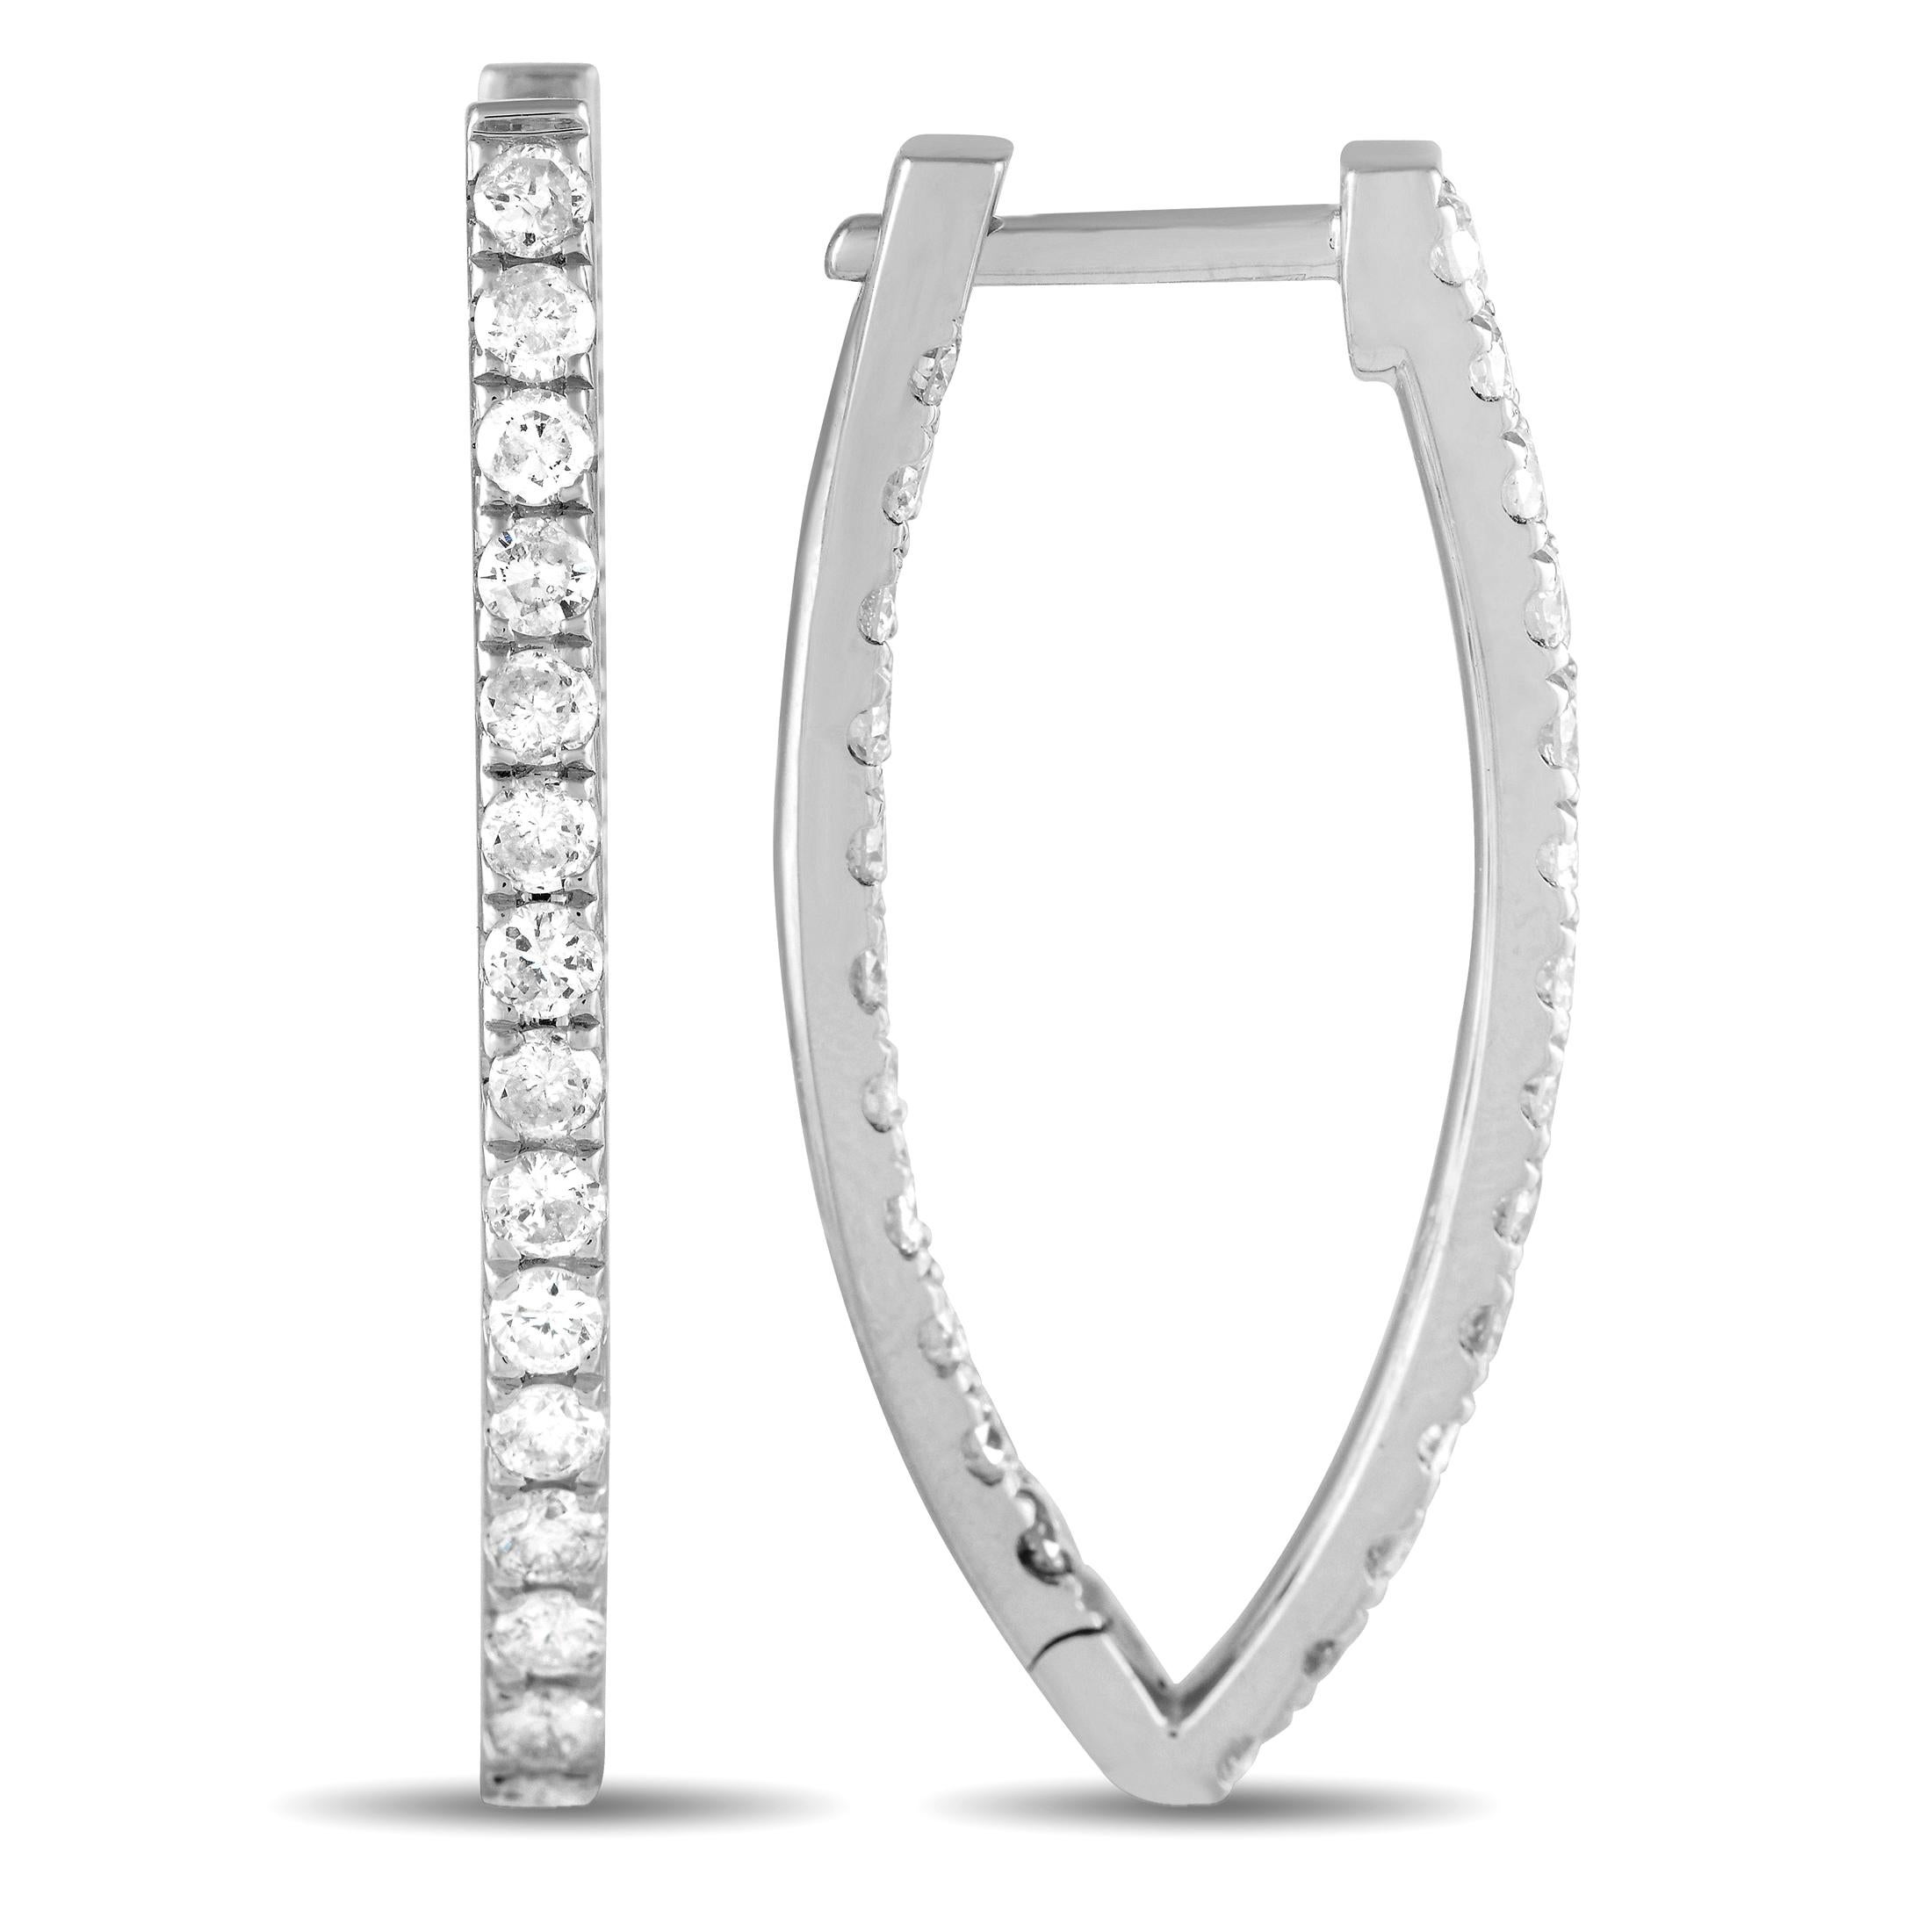 This lustrous pair of diamond hoops is sure to add glamour to your dressiest looks. Each hoop measures 1.25 by 0.60 and has a hinged snap closure. These earrings have an inside-out design where round diamonds run along the inner and outer front